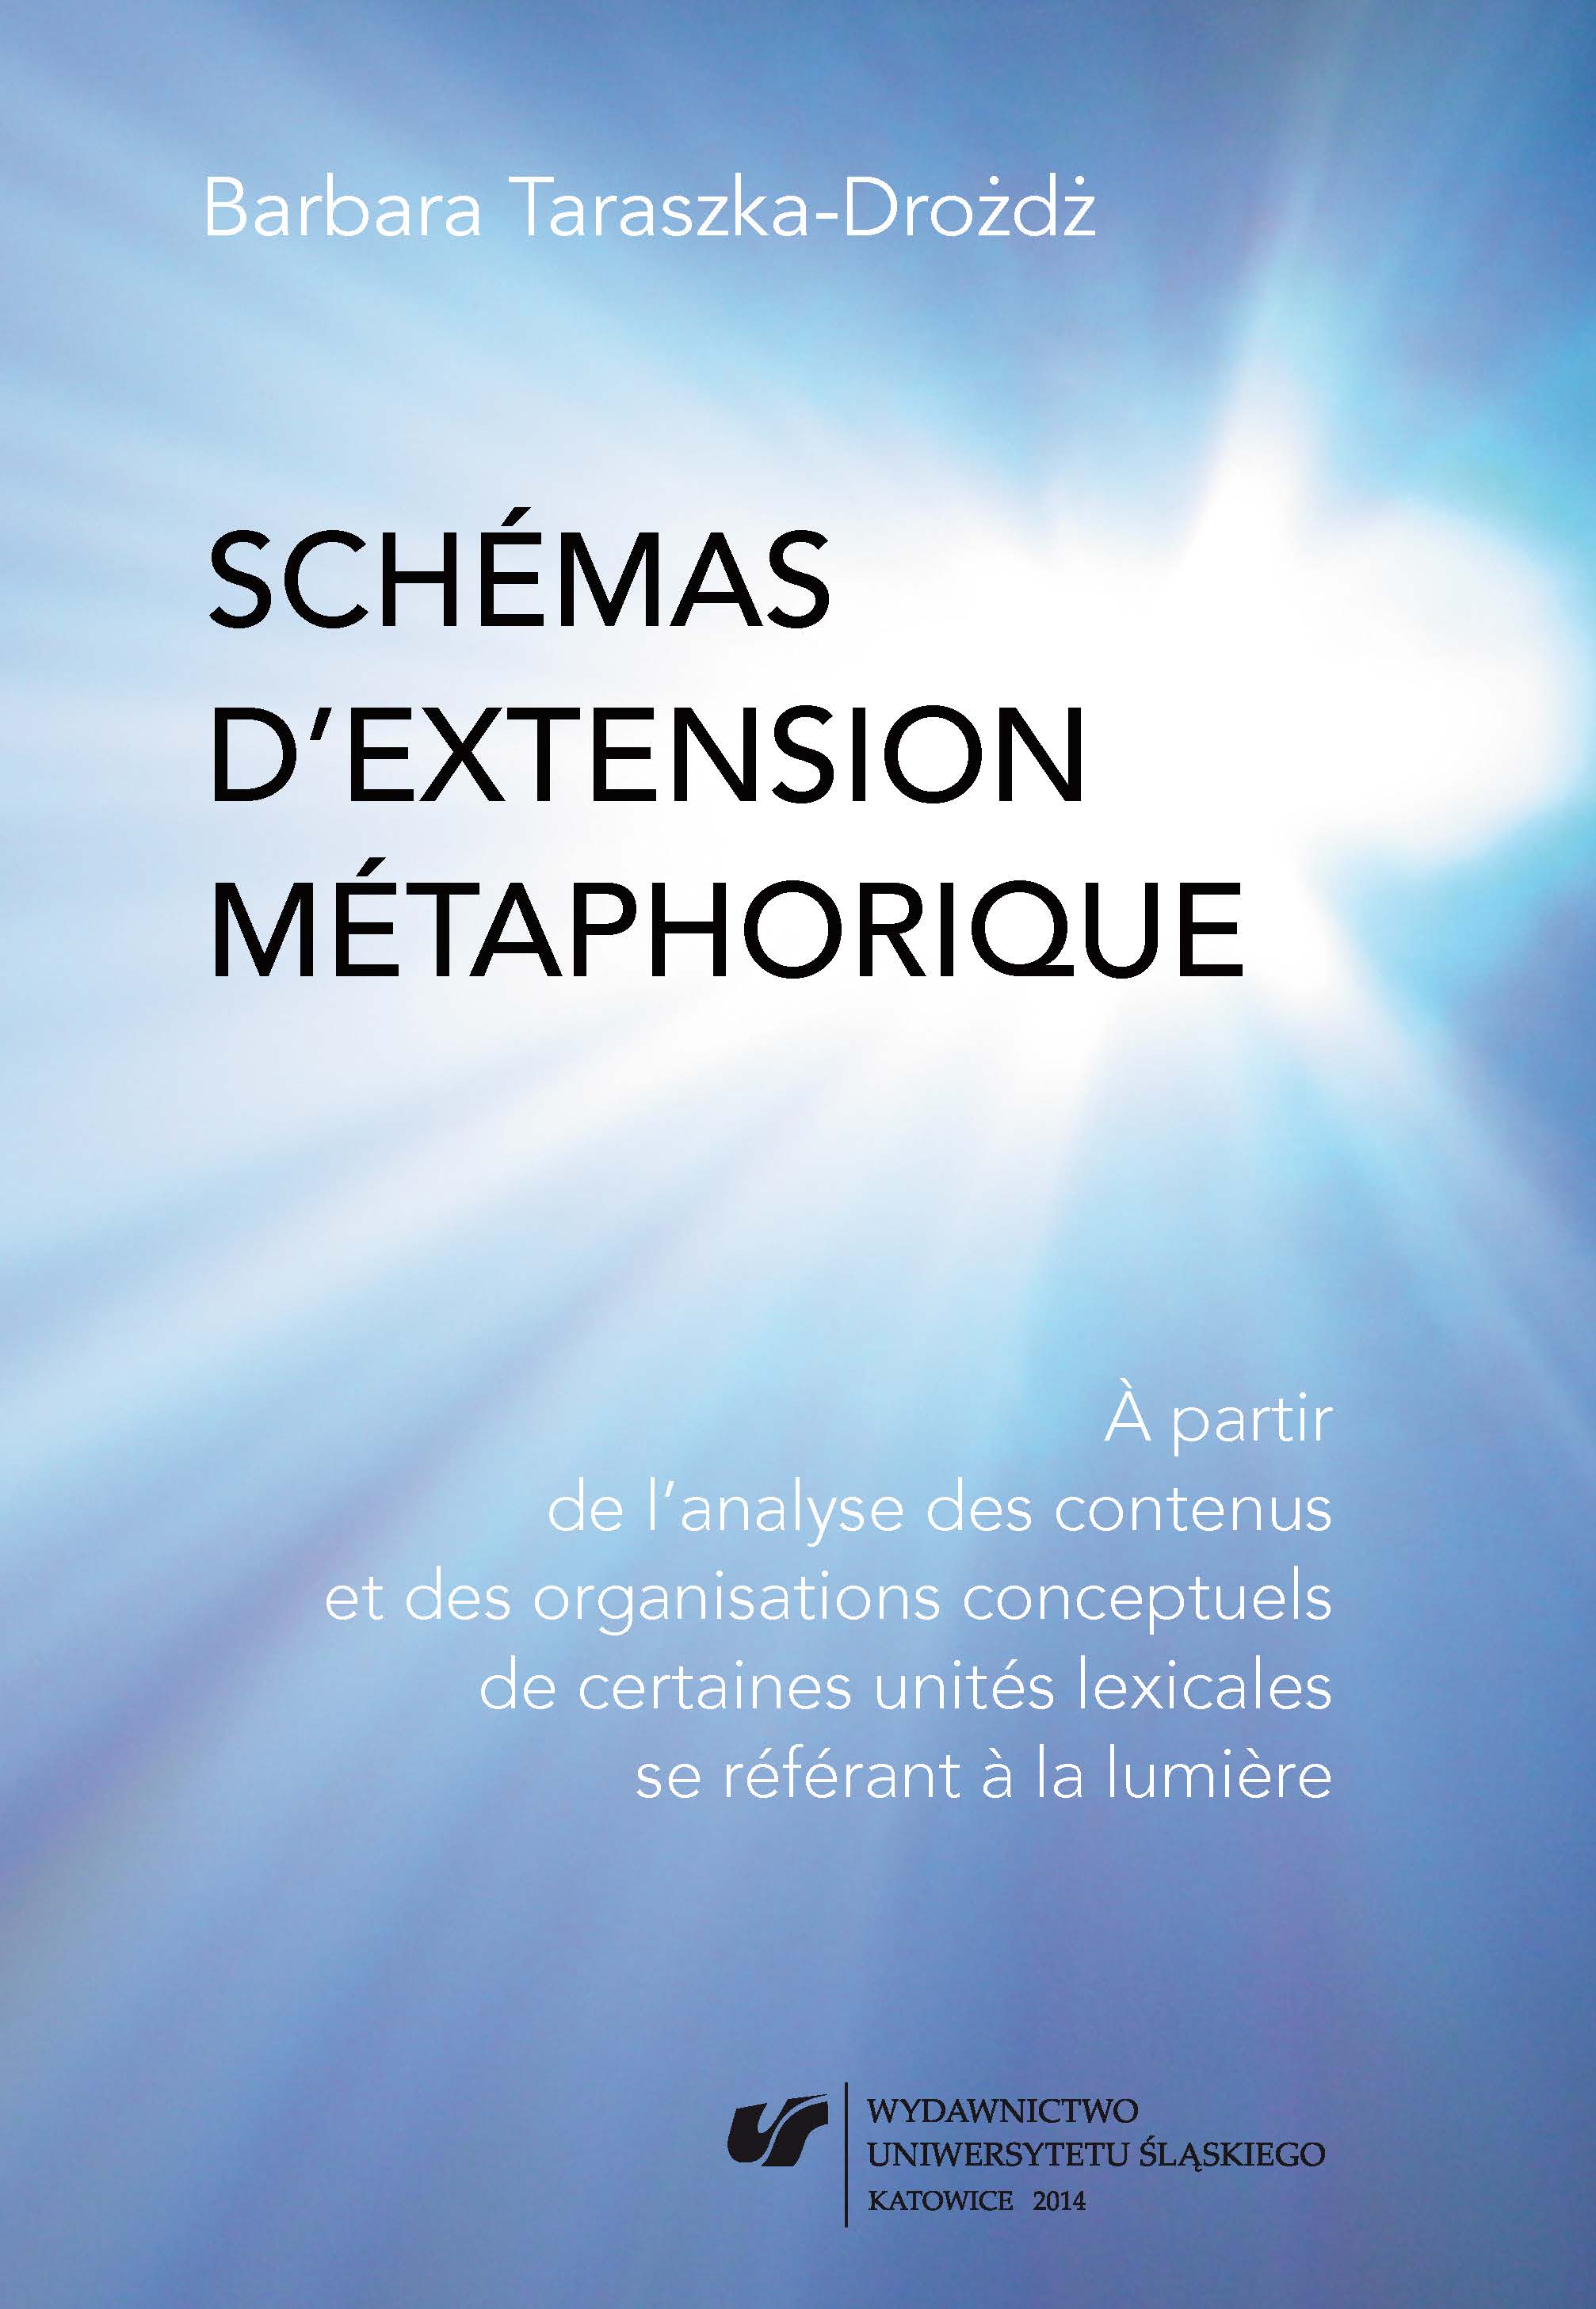 Schemas of metaphorical extension. On the basis of analysis of the conceptual content and organization of selected lexical units referring to light